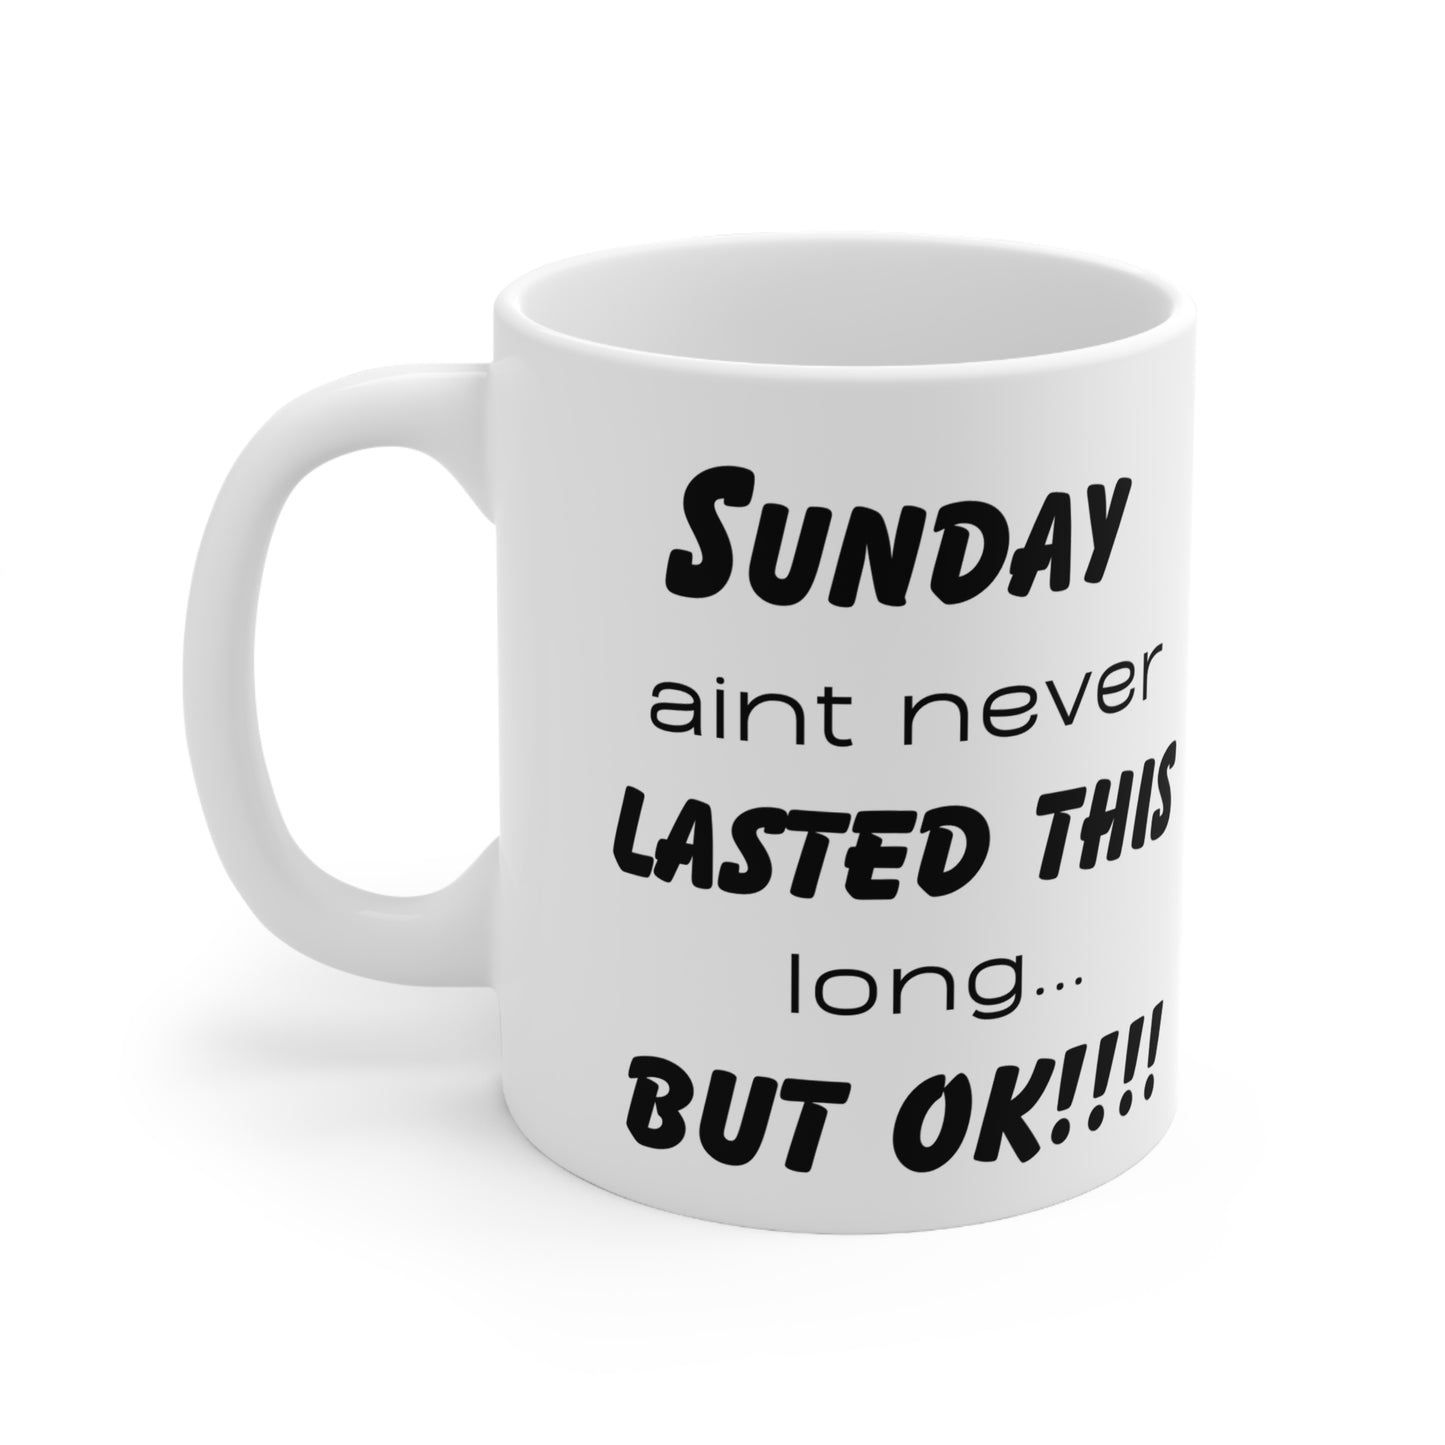 Sunday ain't never this long ...but ok! Ceramic Coffee Cups, 11oz, 15oz